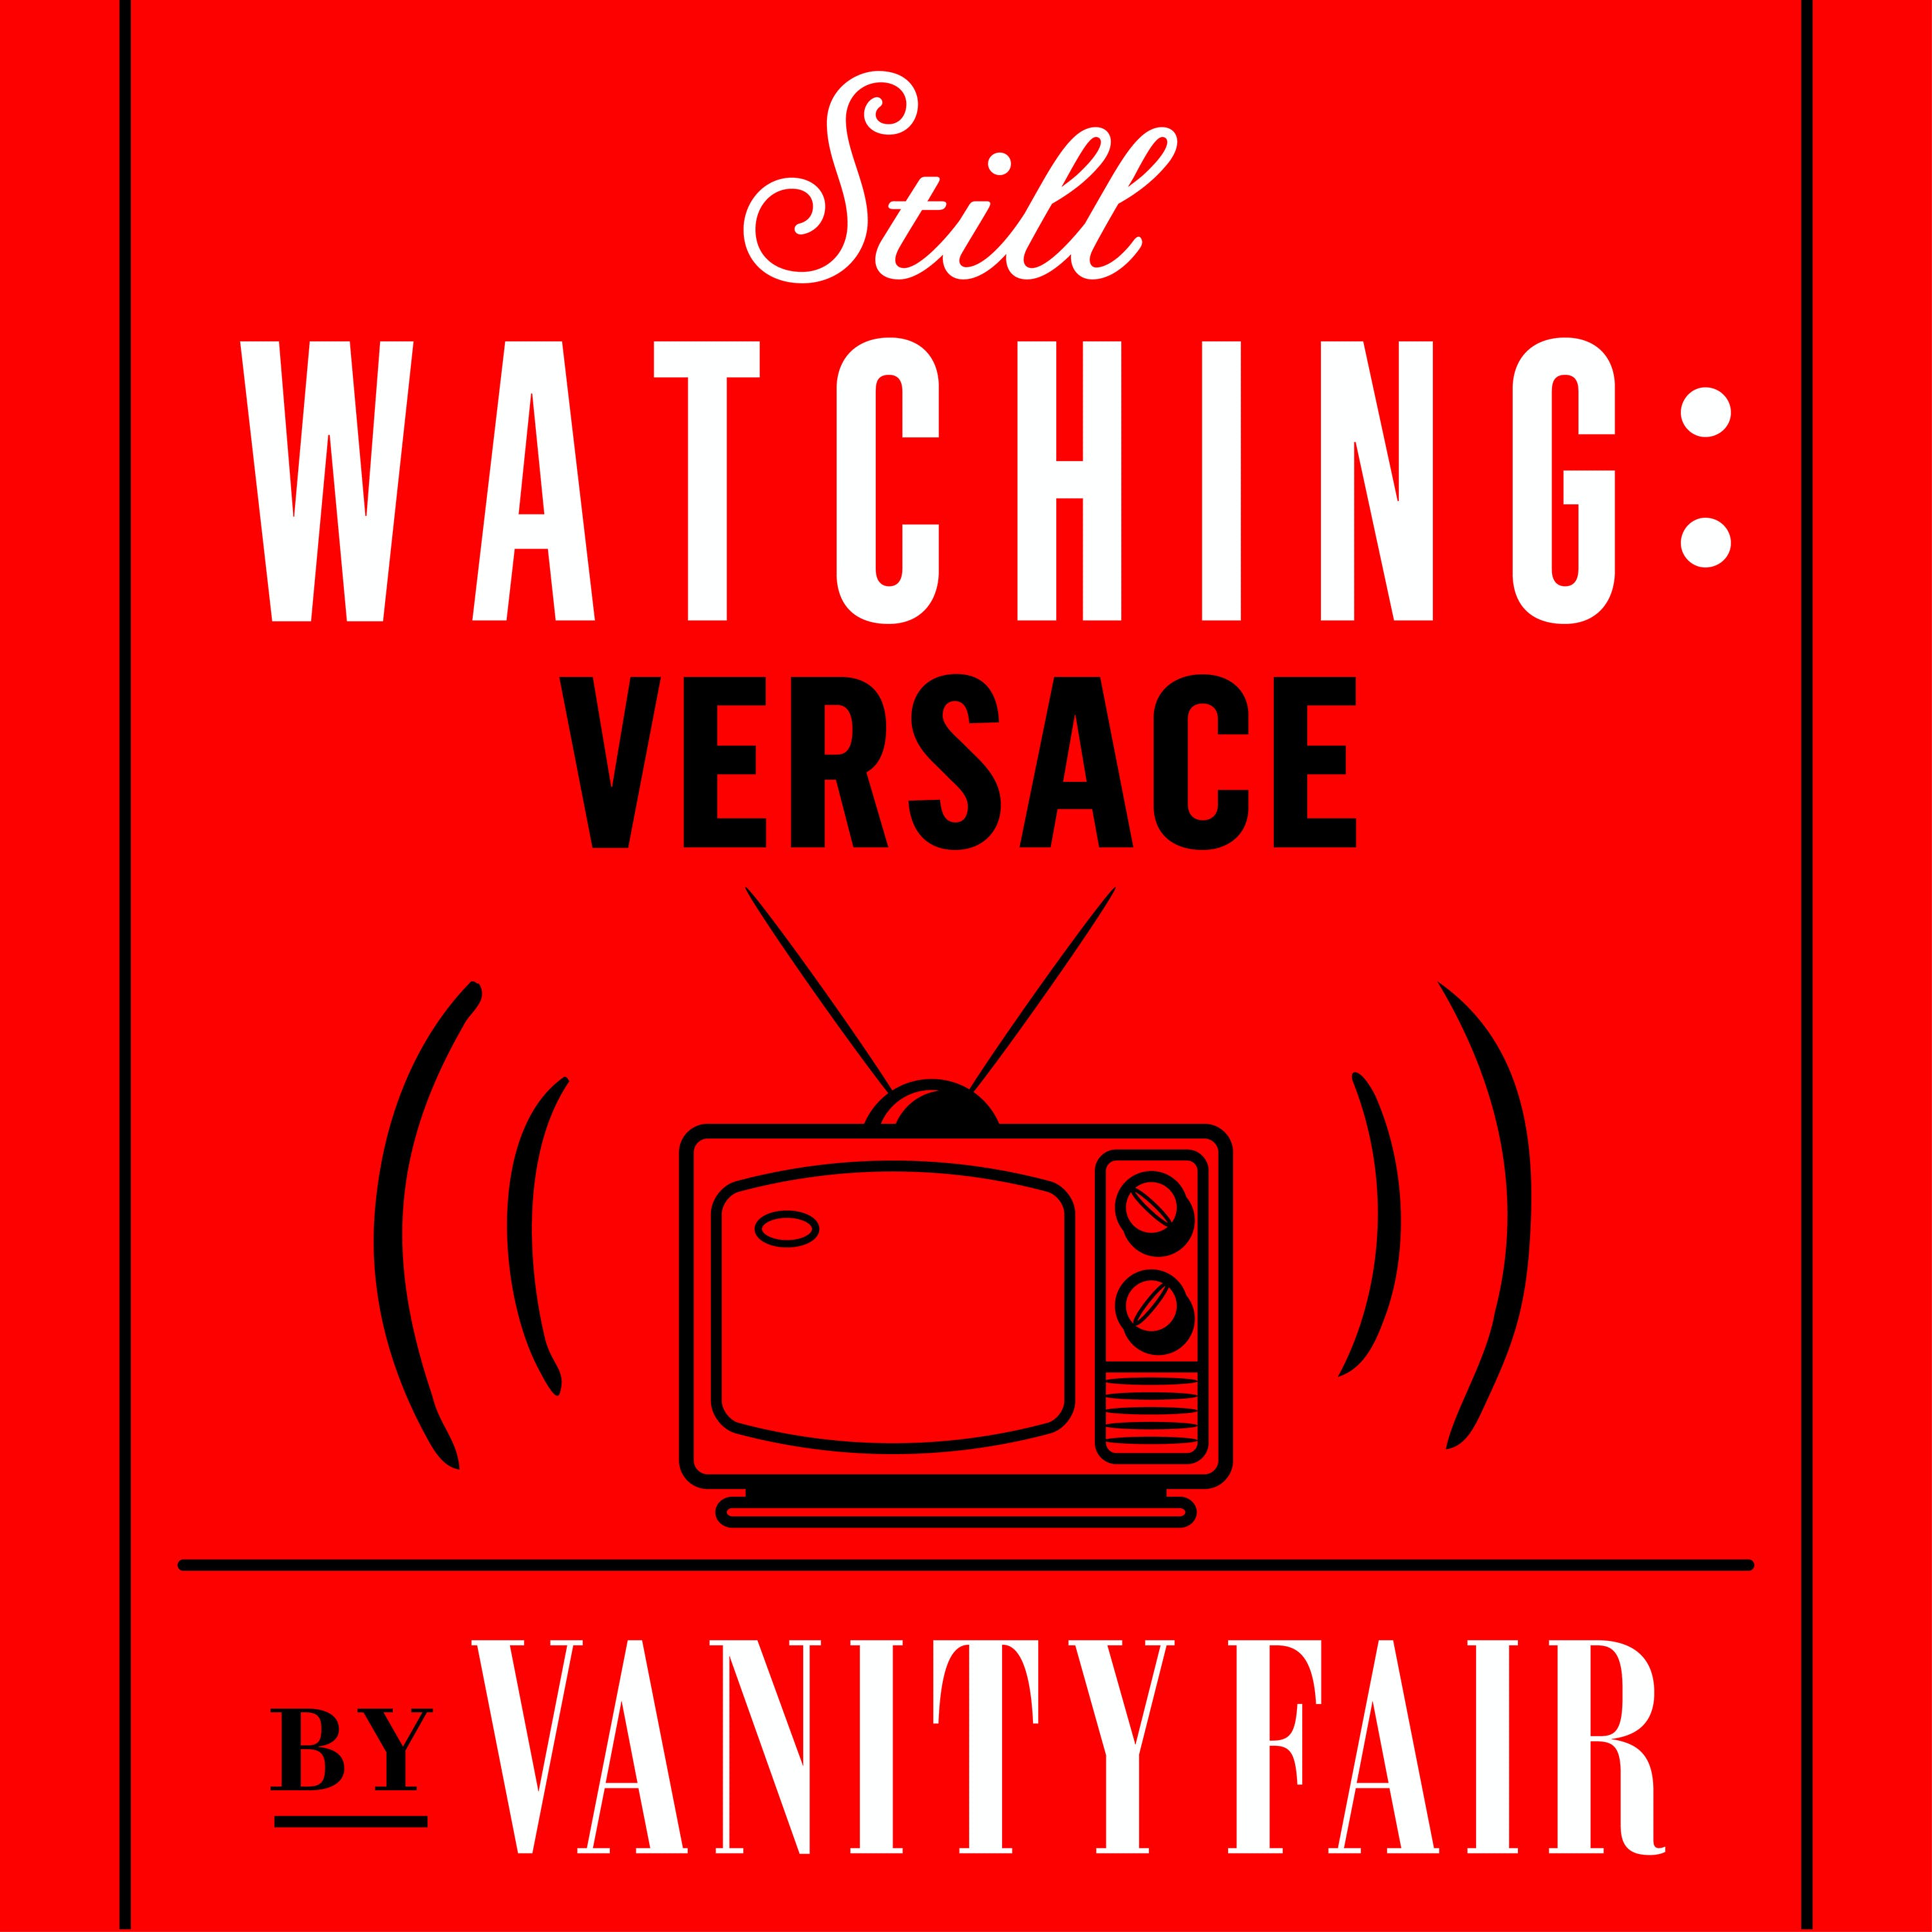 Thumbnail for "American Crime Story: Introducing Still Watching: Versace".